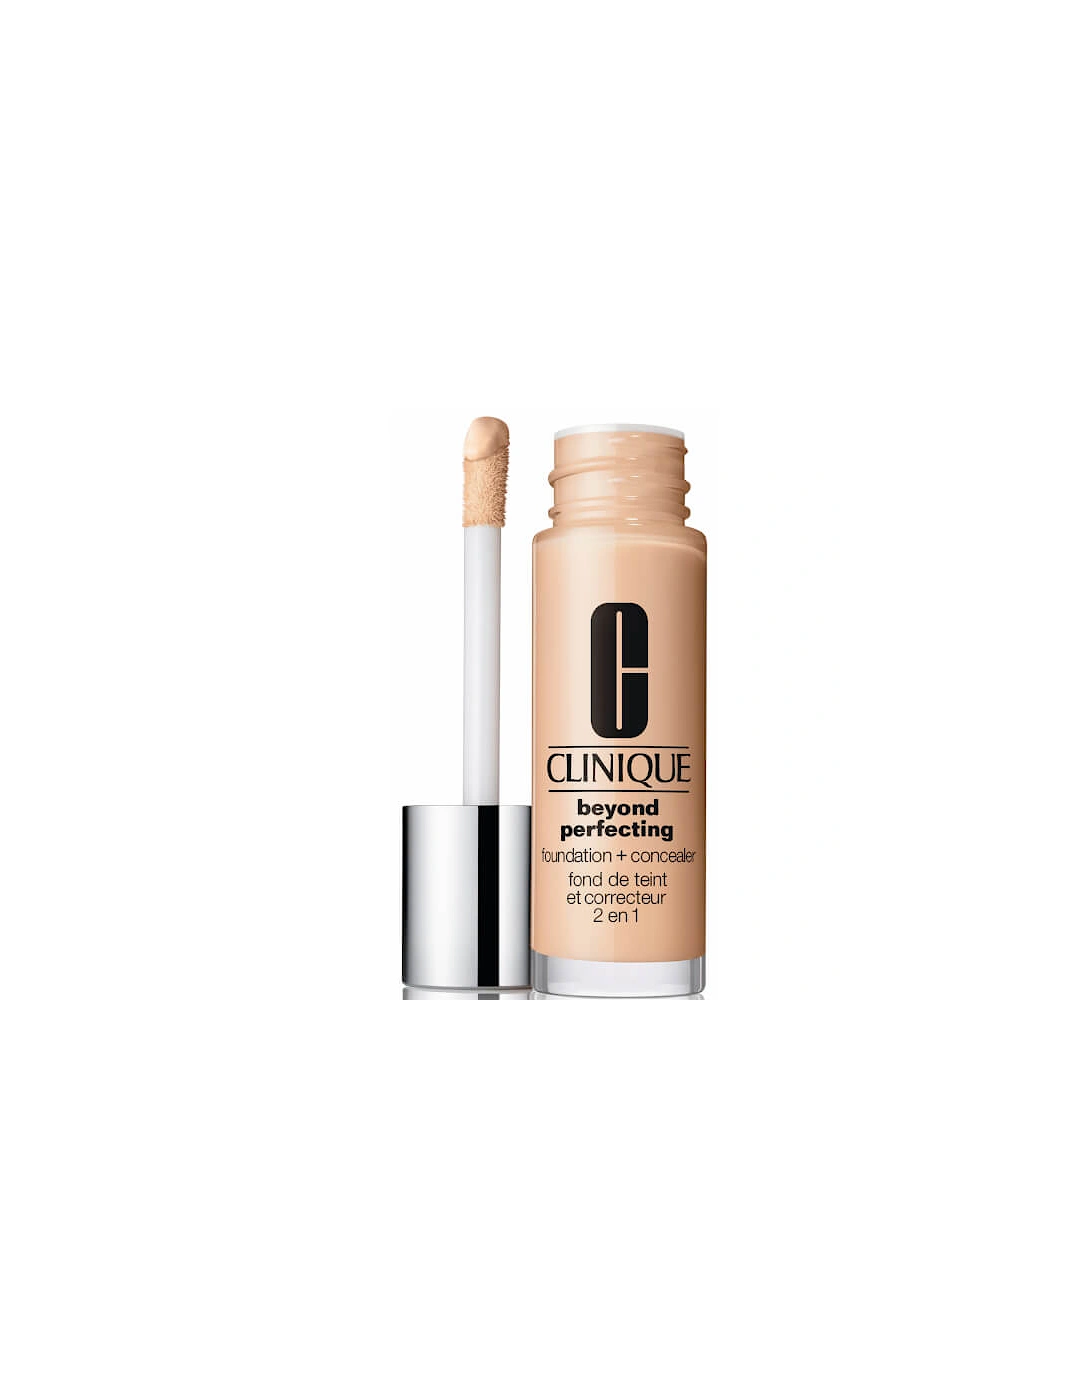 Beyond Perfecting Foundation and Concealer - Cork, 2 of 1